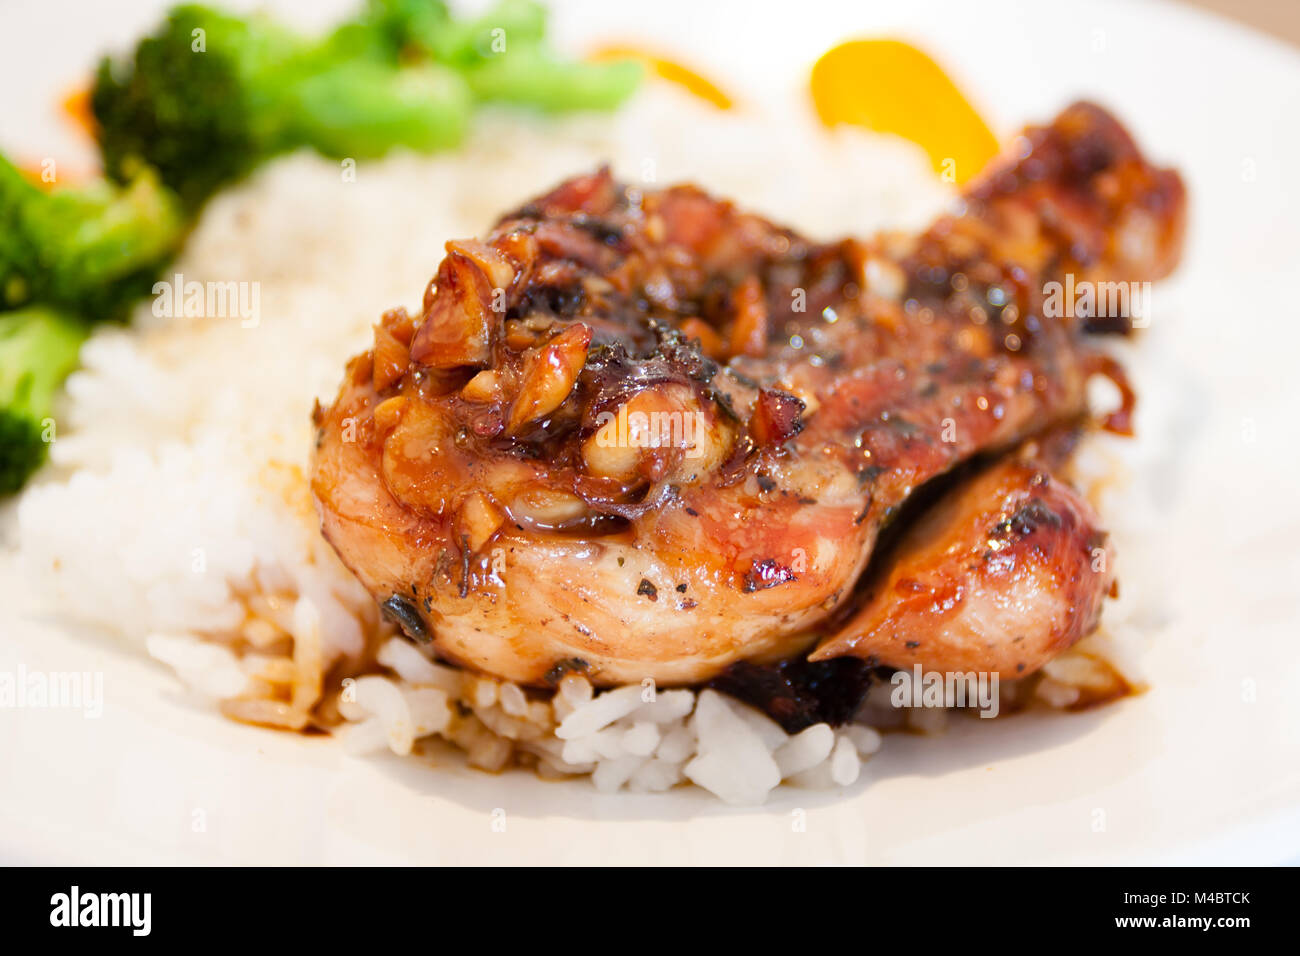 Authentic food prep, juicy roasted chicken drumsticks, homemade, with soy sauce, rice wine, sugar, garlic, oregano; rice with carrot and broccoli Stock Photo